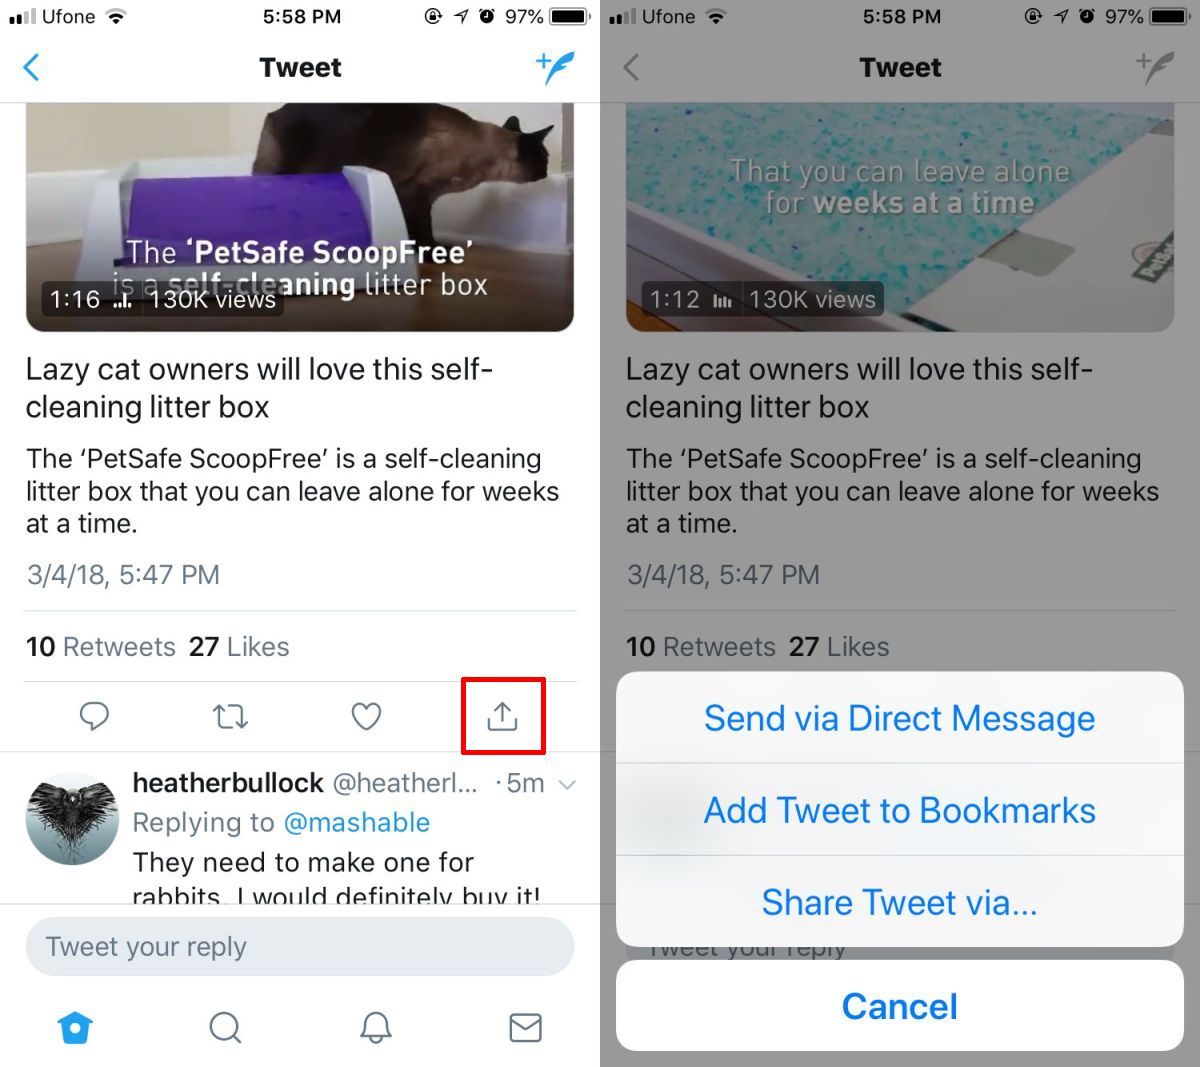 How To Bookmark A Tweet On Twitter